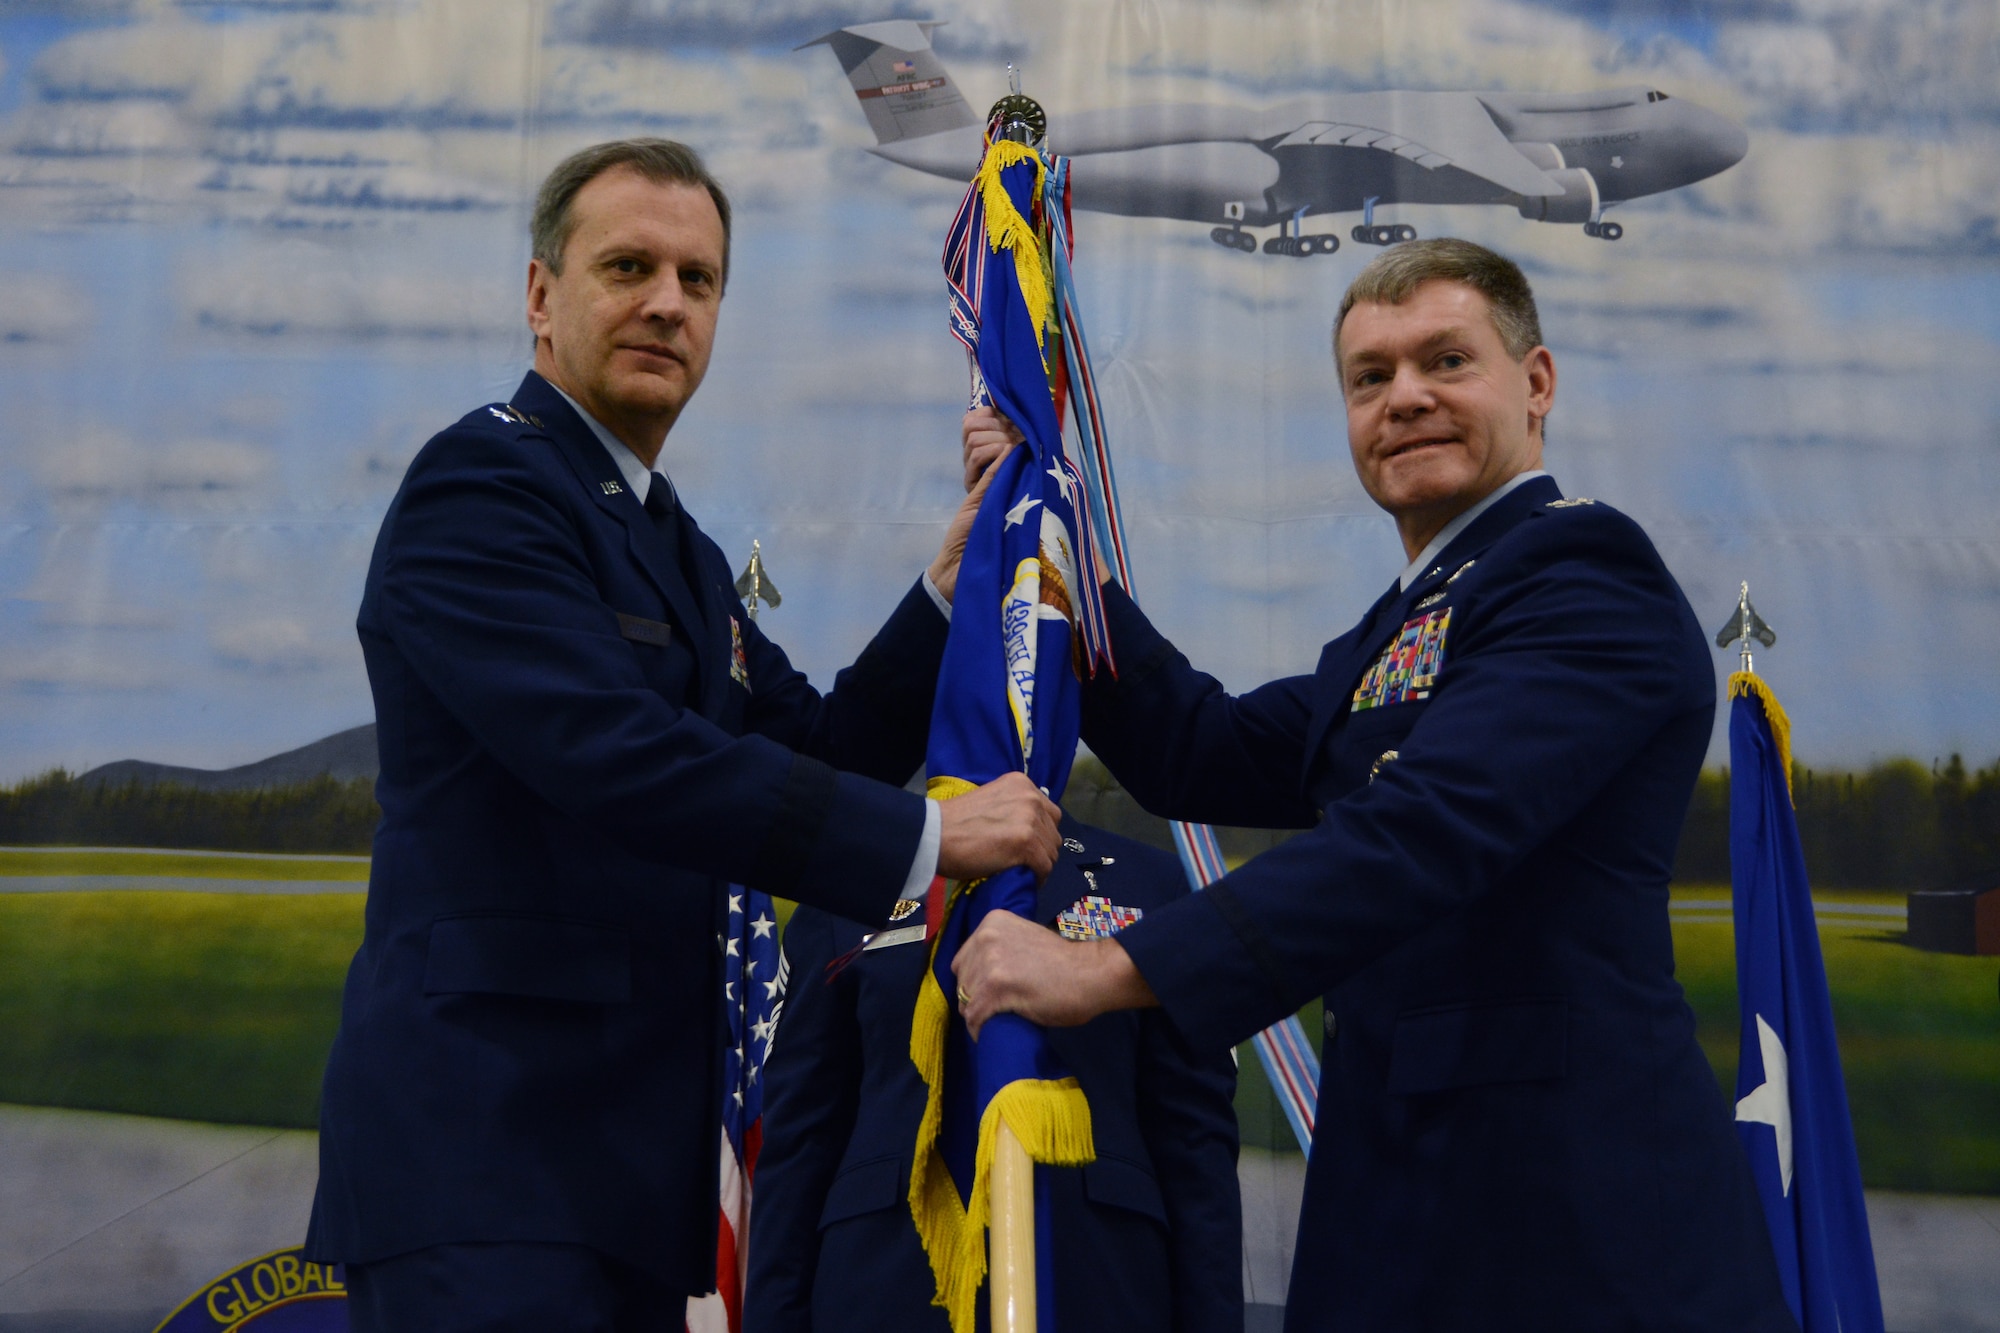 Maj. Gen. Randall A. Ogden, Air Force Reserve Command 4th Air Force commander, passes the 439th Airlift Wing guidon to Col. Craig C. Peters, the new 439th Airlift Wing commander, during a change of command ceremony, April 6, 2019, Westover Air Reserve Base, Mass. Though officially Peters won’t assume command until April 14, the ceremony was held in advance in order to coincide with a Unit Training Assembly, when the majority of reservists are on duty. (U.S. Air Force photo by Senior Airman Hanna Smith/Released)